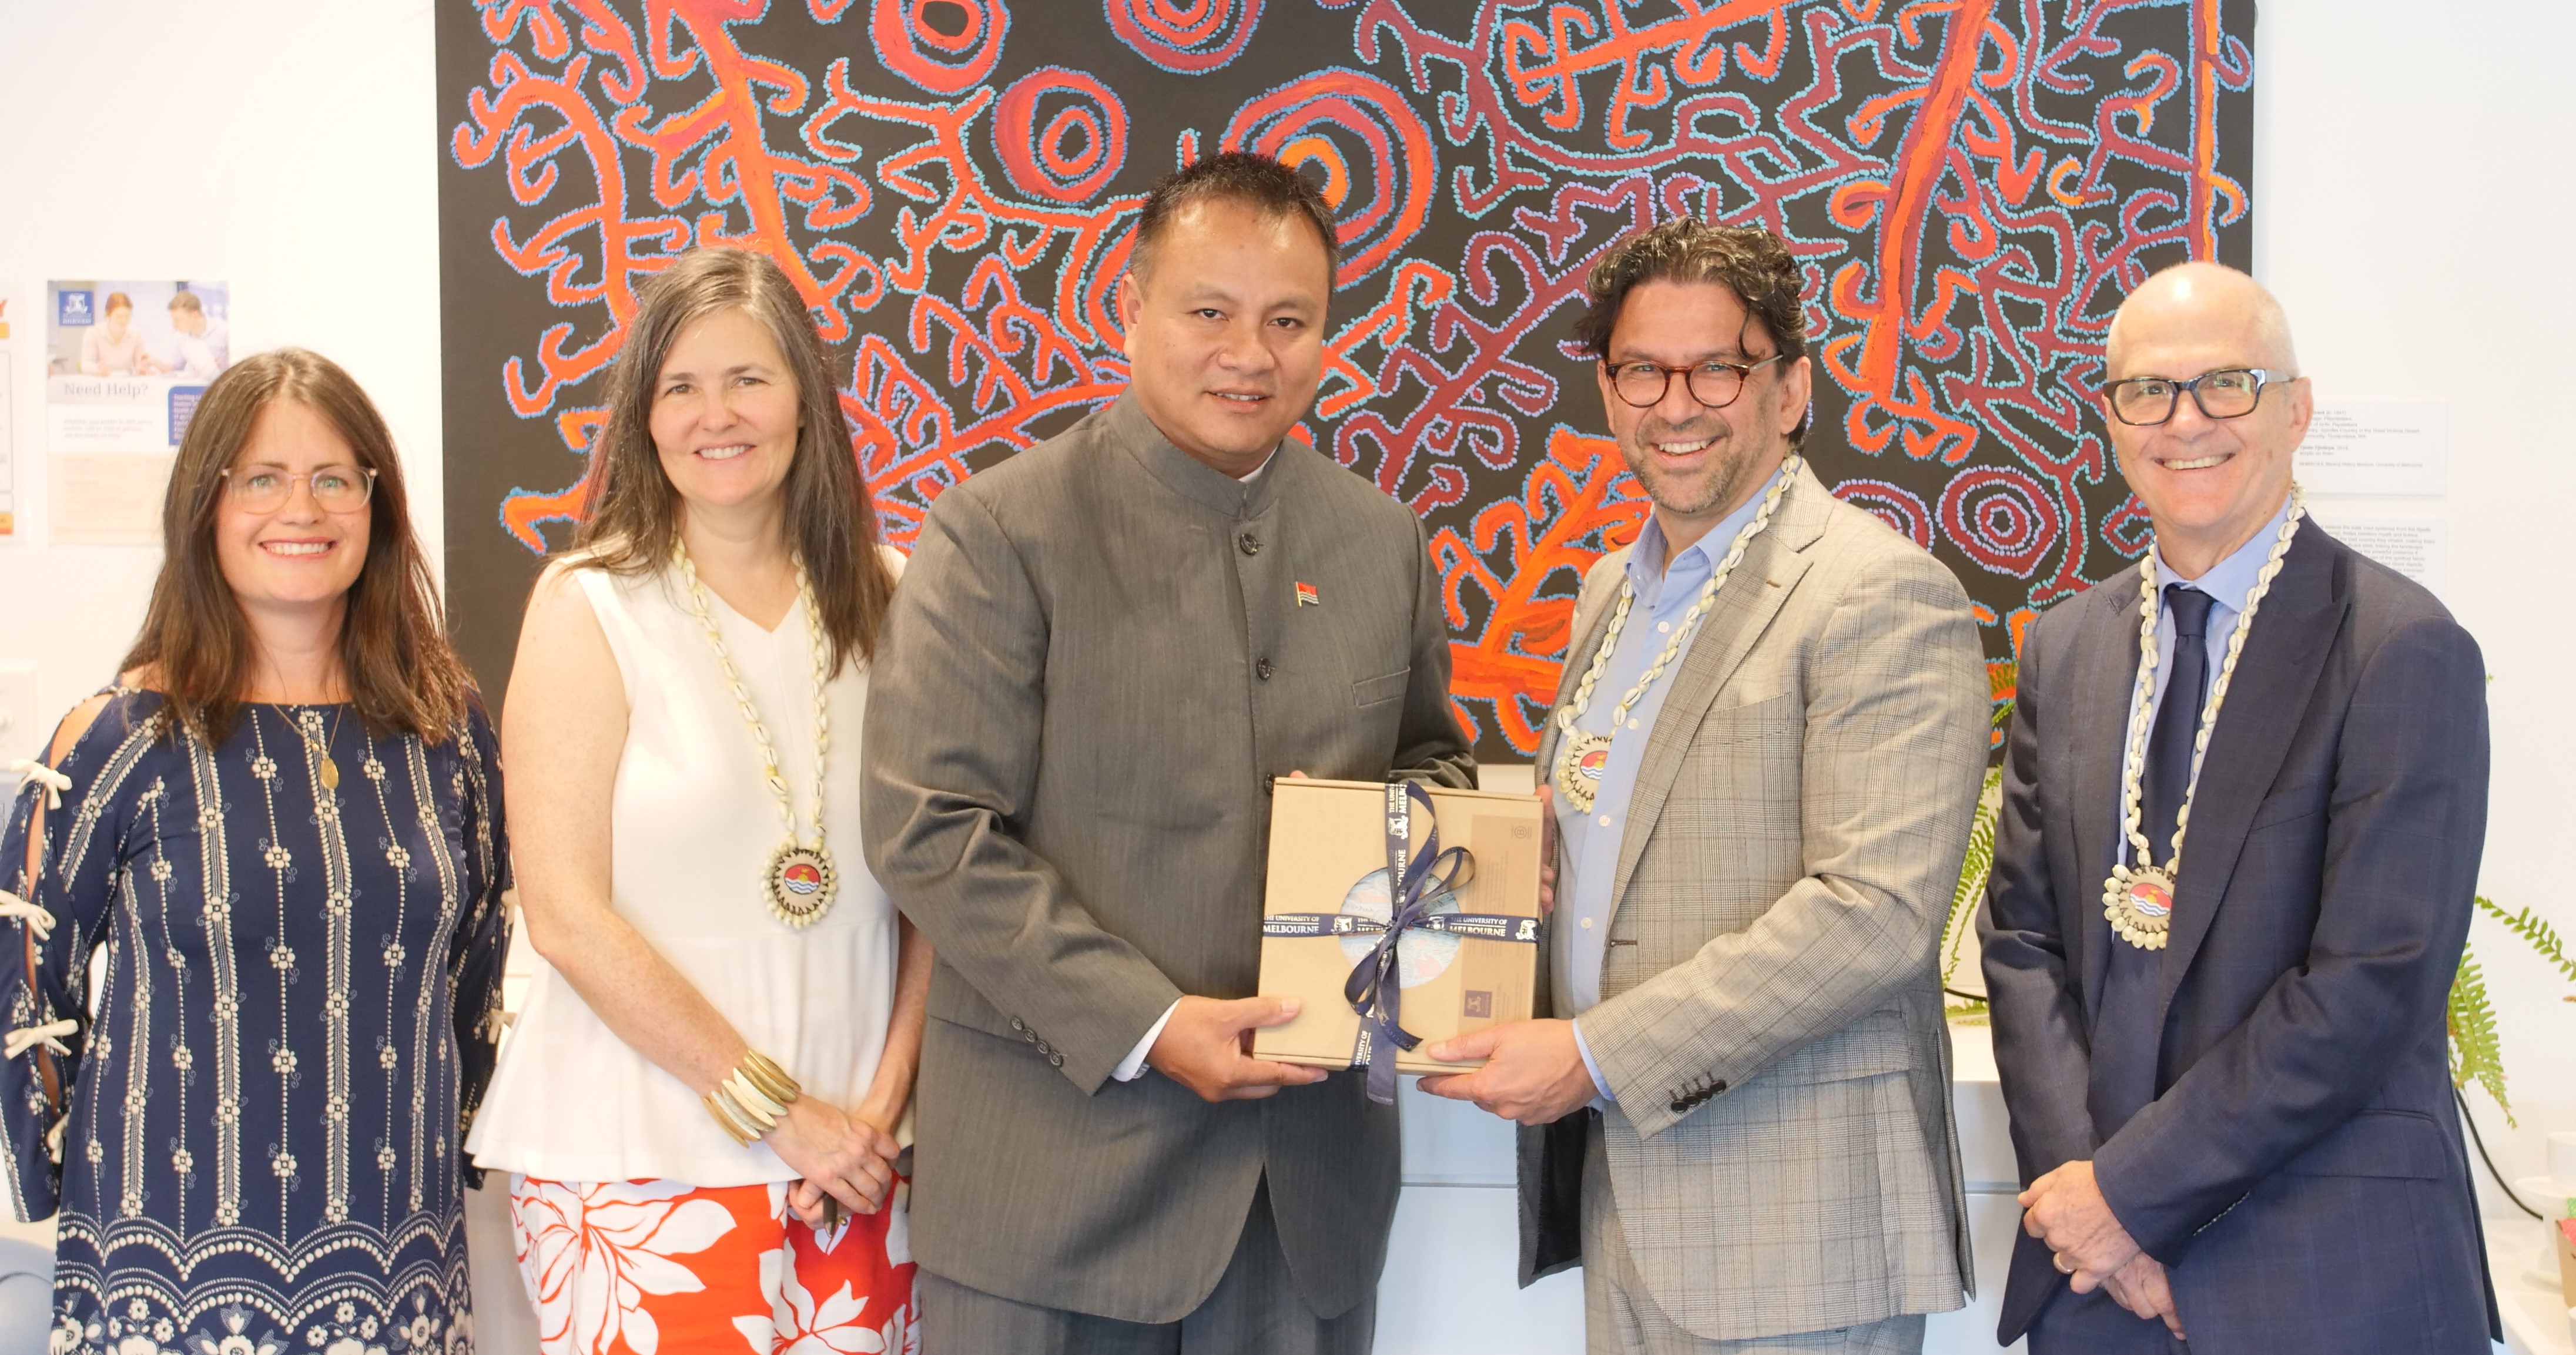 Giving a gift at the signing of the Memorandum of Understanding between the government of Kiribati and the University of Melbourne.